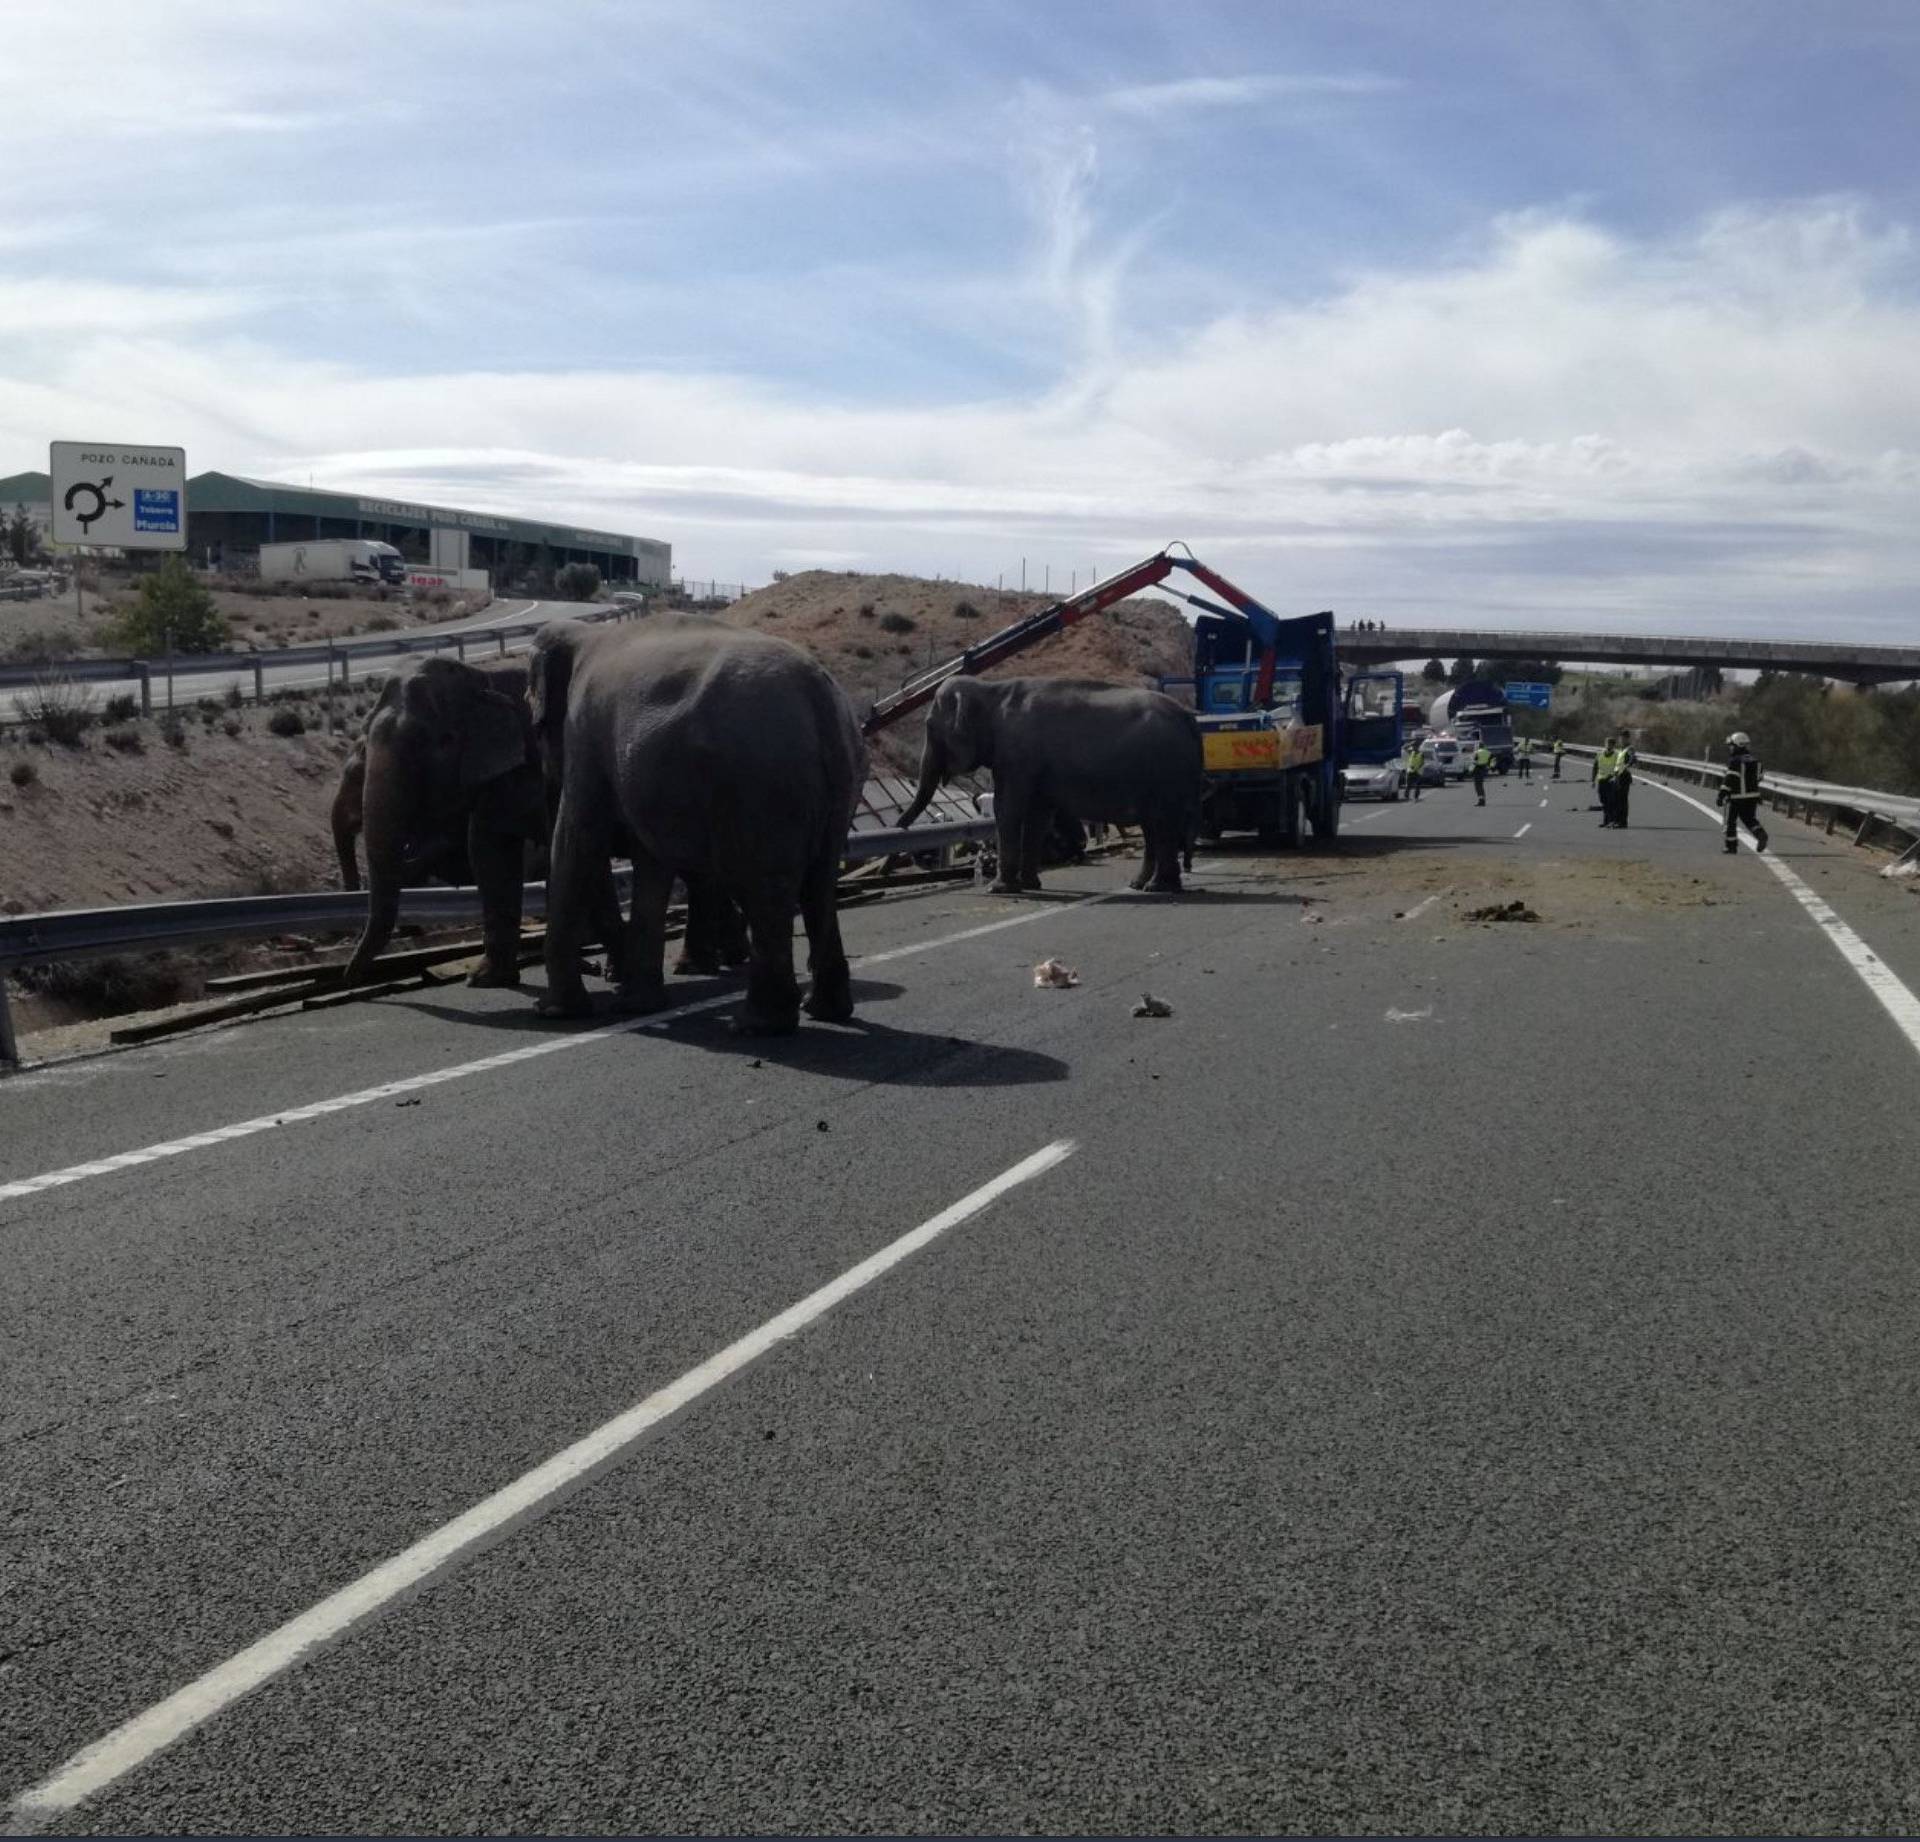 Elephants stand on the road after circus truck that was transporting them crashed, in Pozo Canada